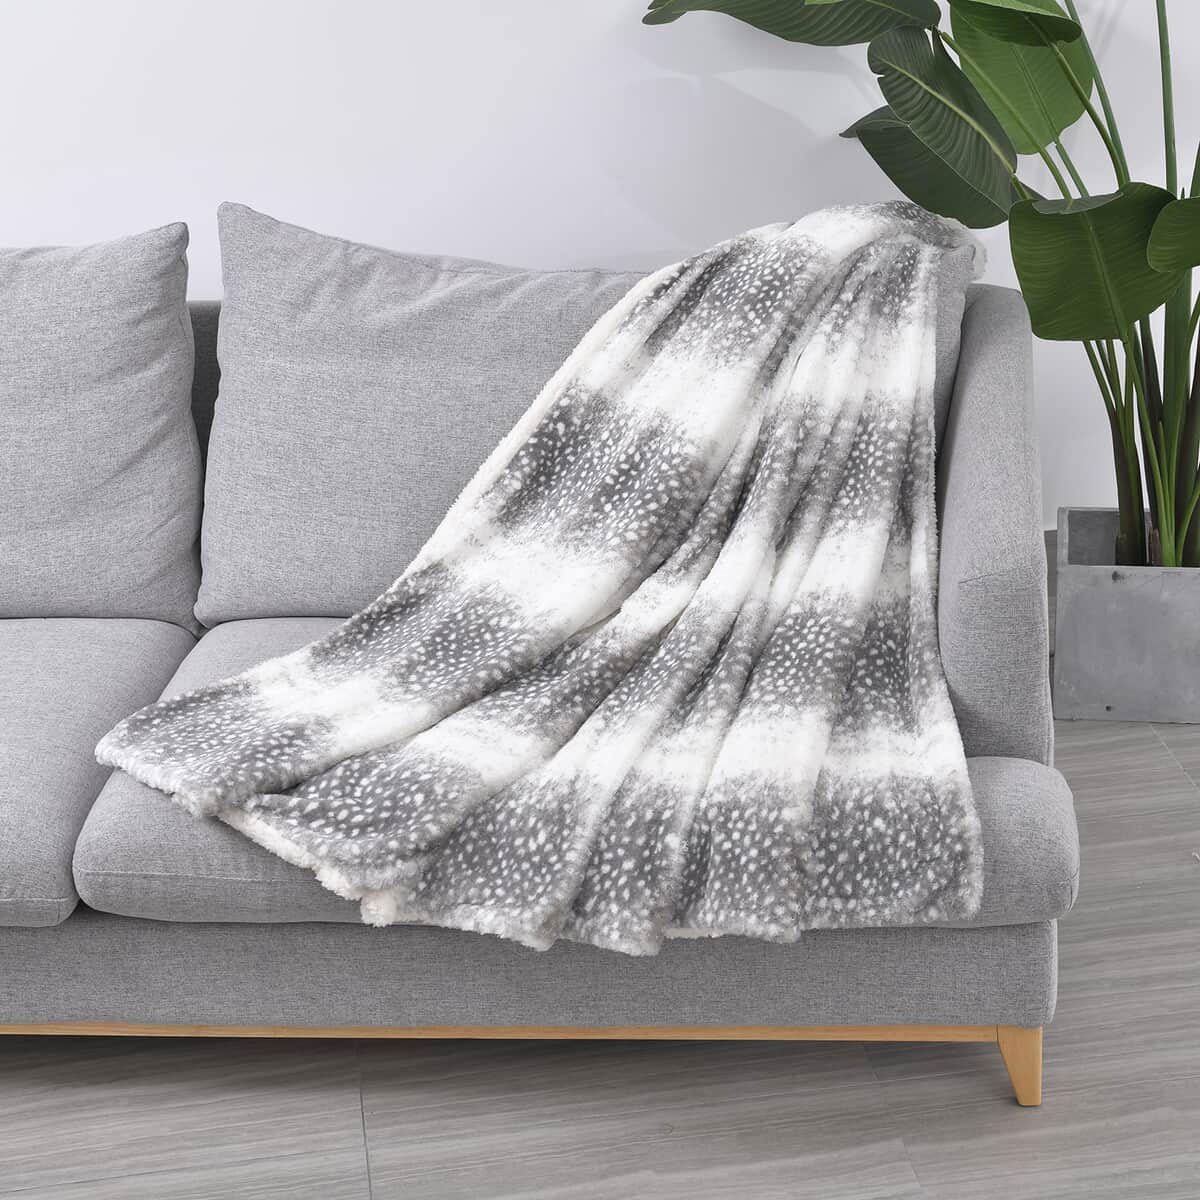 Homesmart Gradient Stripes and Dots Pattern Faux Fur Sherpa Blanket - Gray image number 0